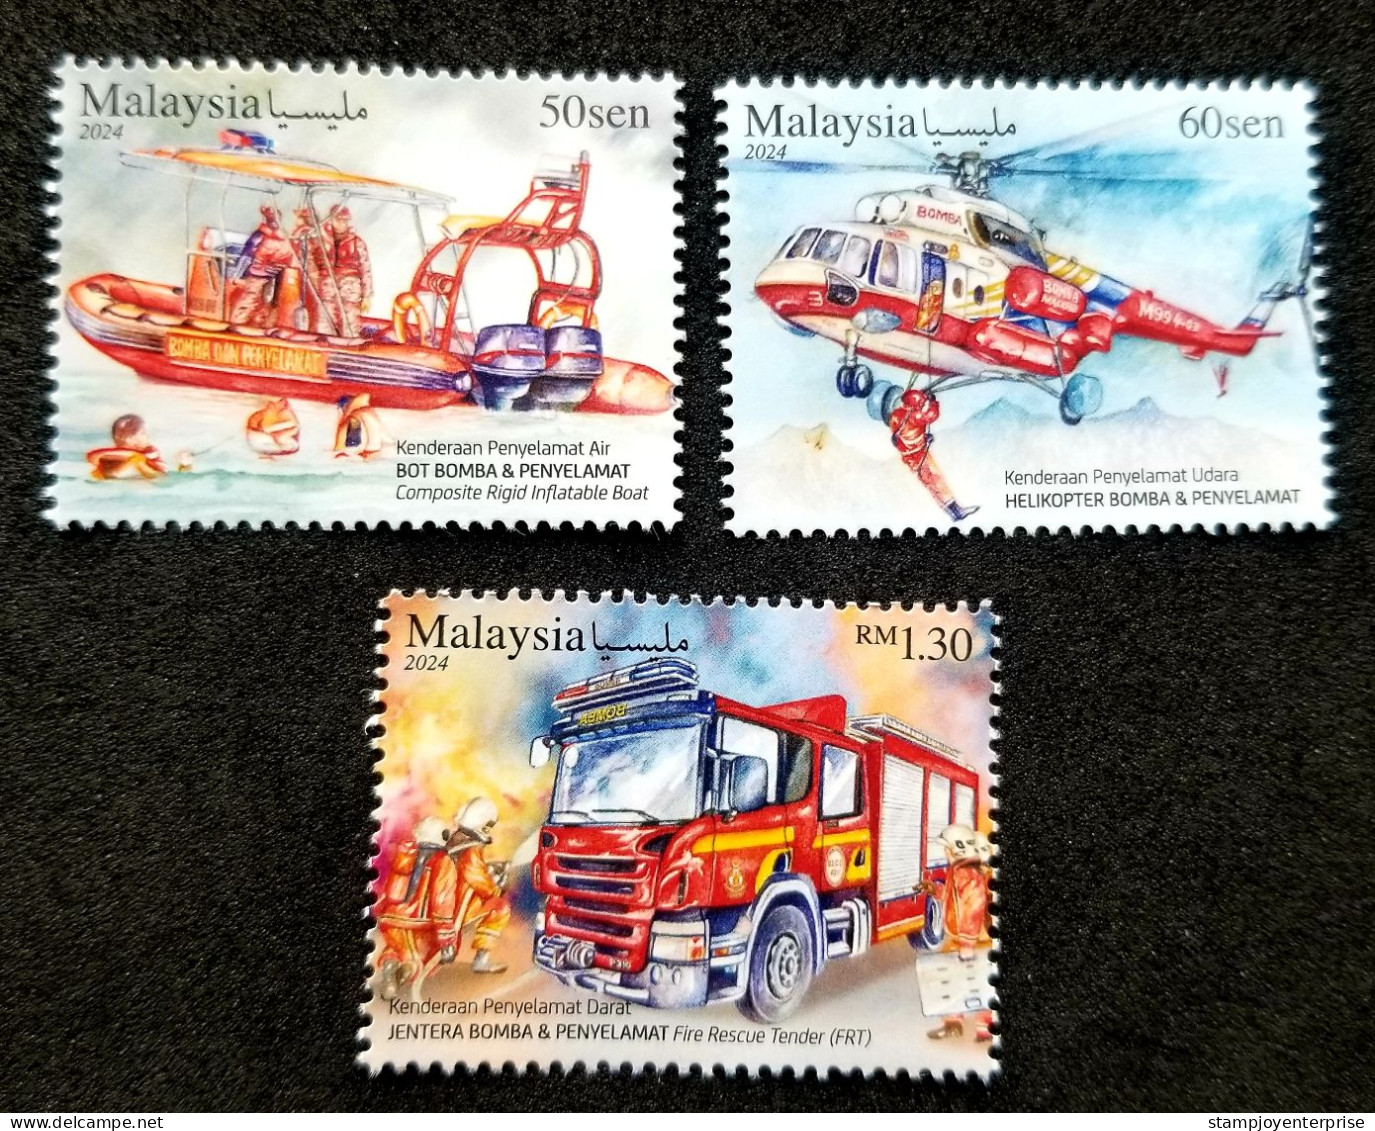 Malaysia Rescue Vehicle 2024 Helicopter Fire Engine Brigade Boat Ship Transport Firefighting Fireman (stamp) MNH - Maleisië (1964-...)